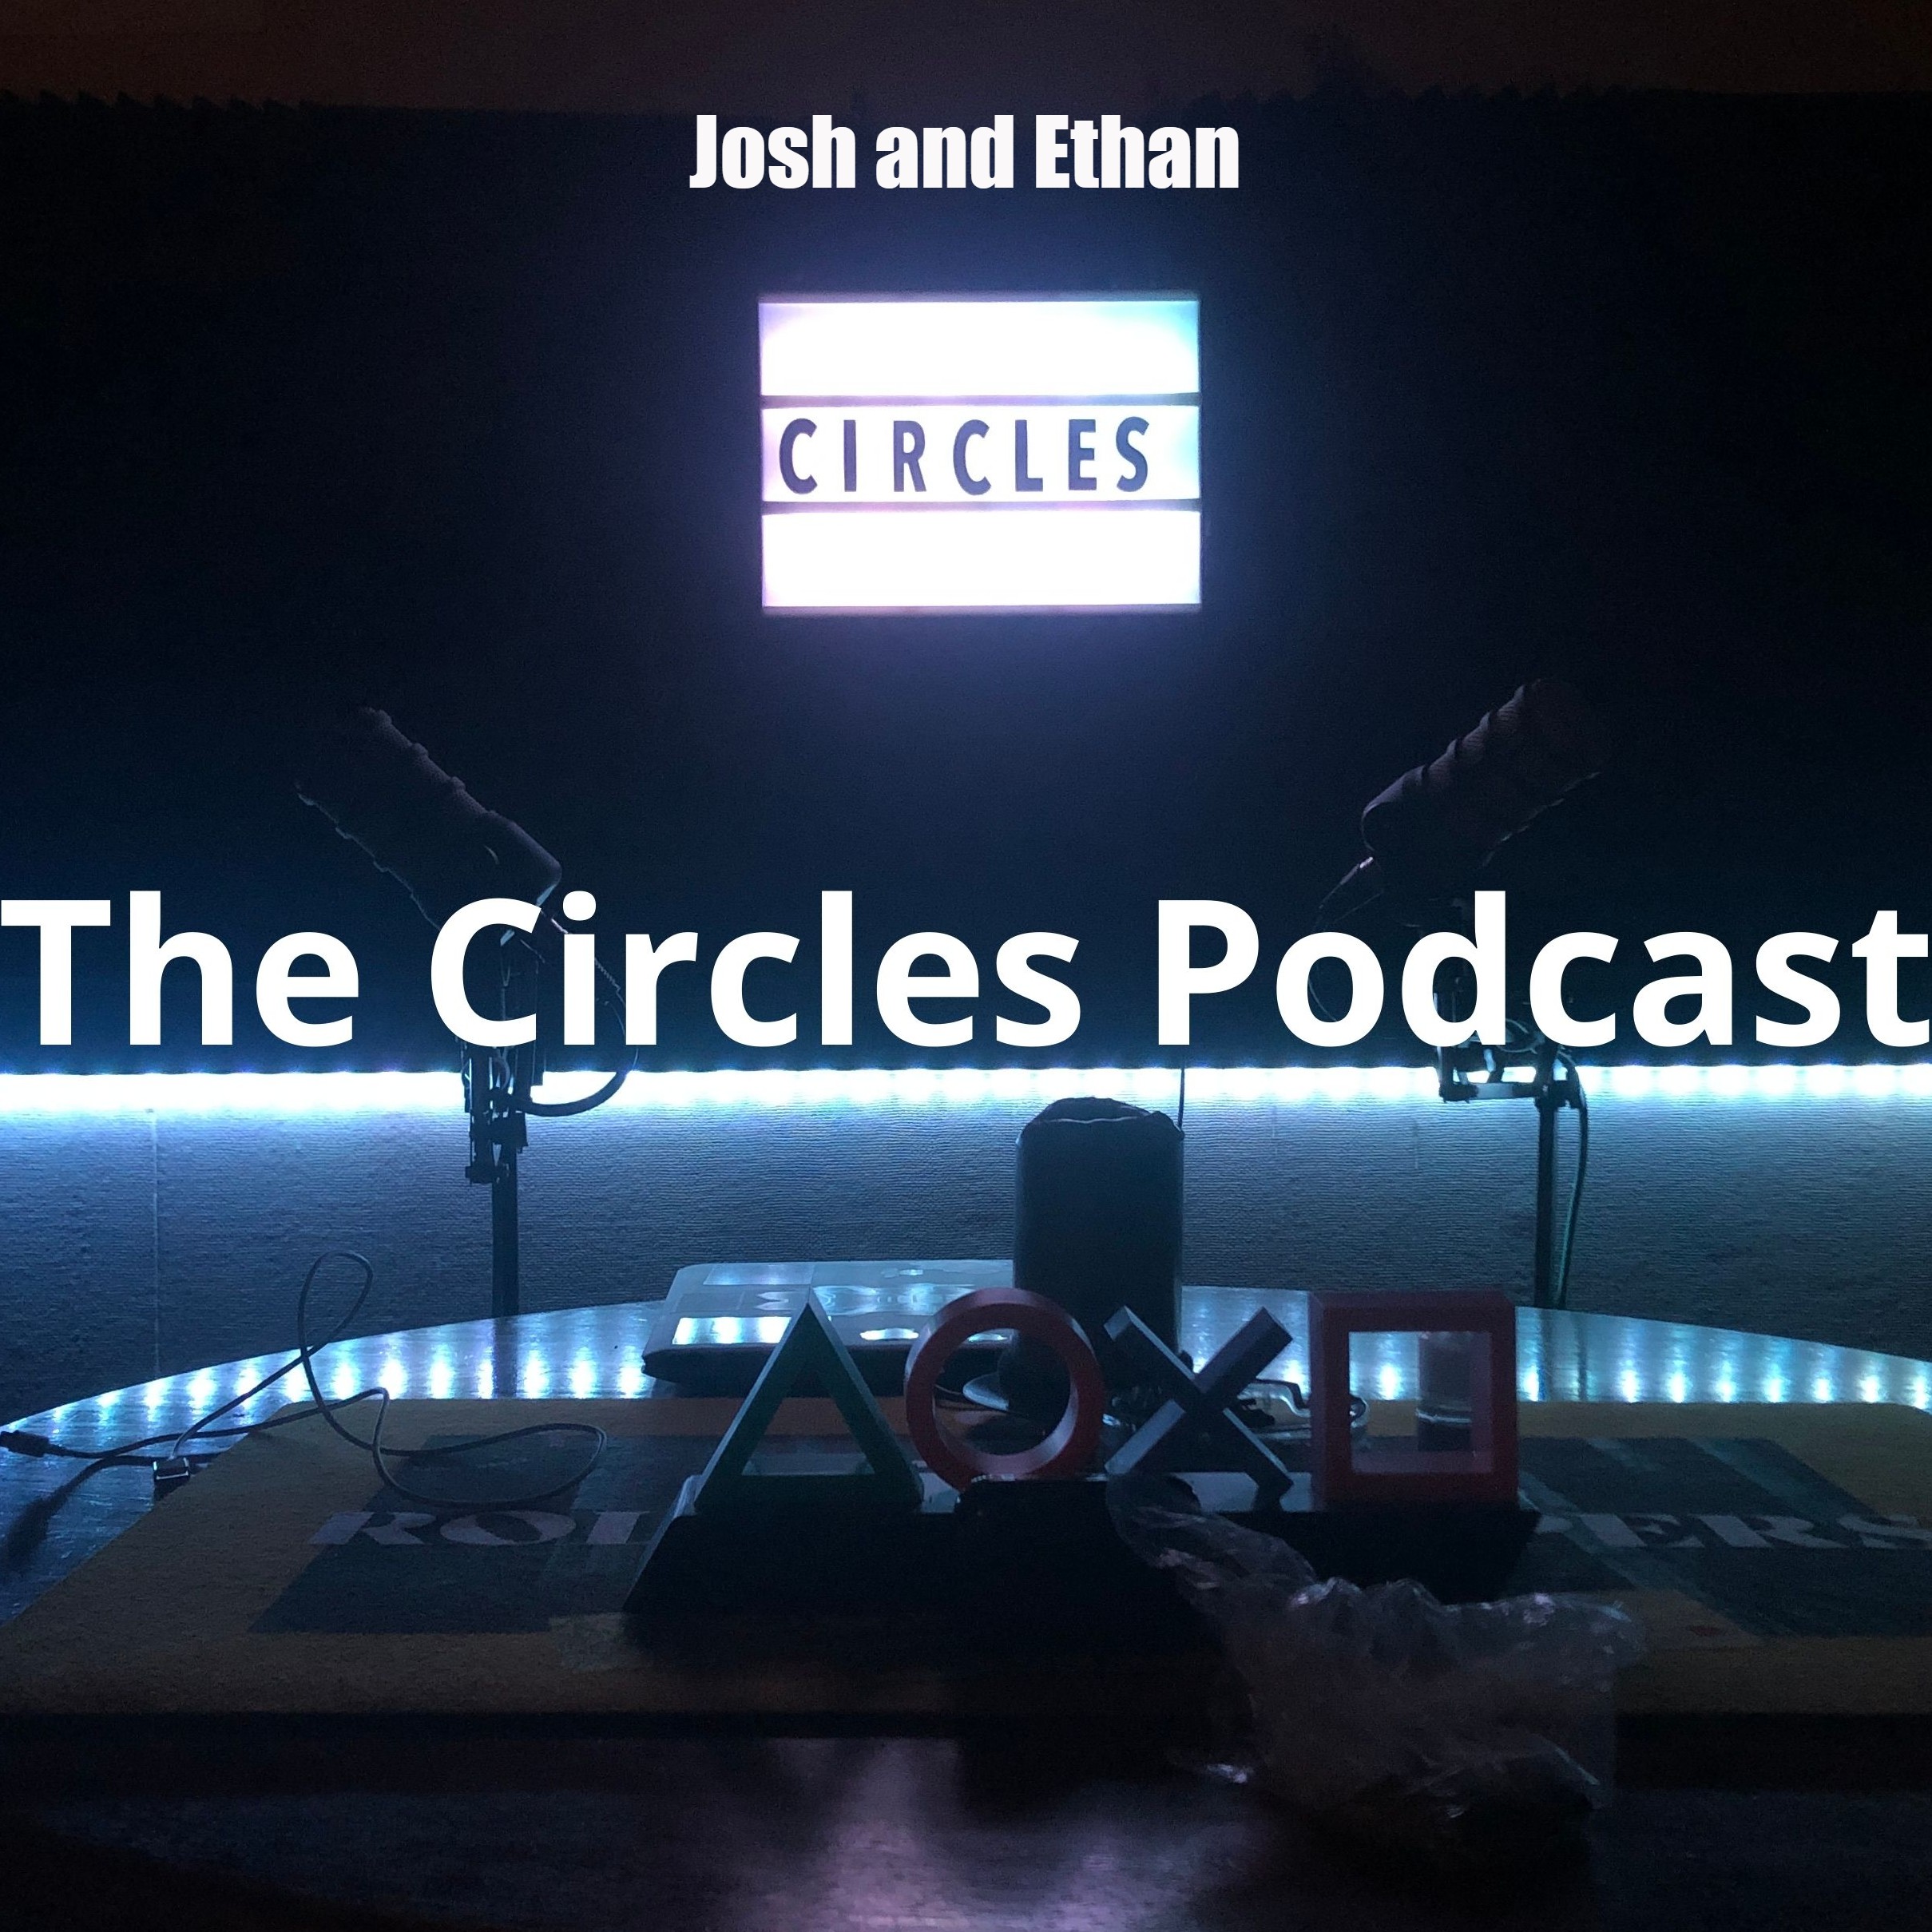 The Circles Podcast